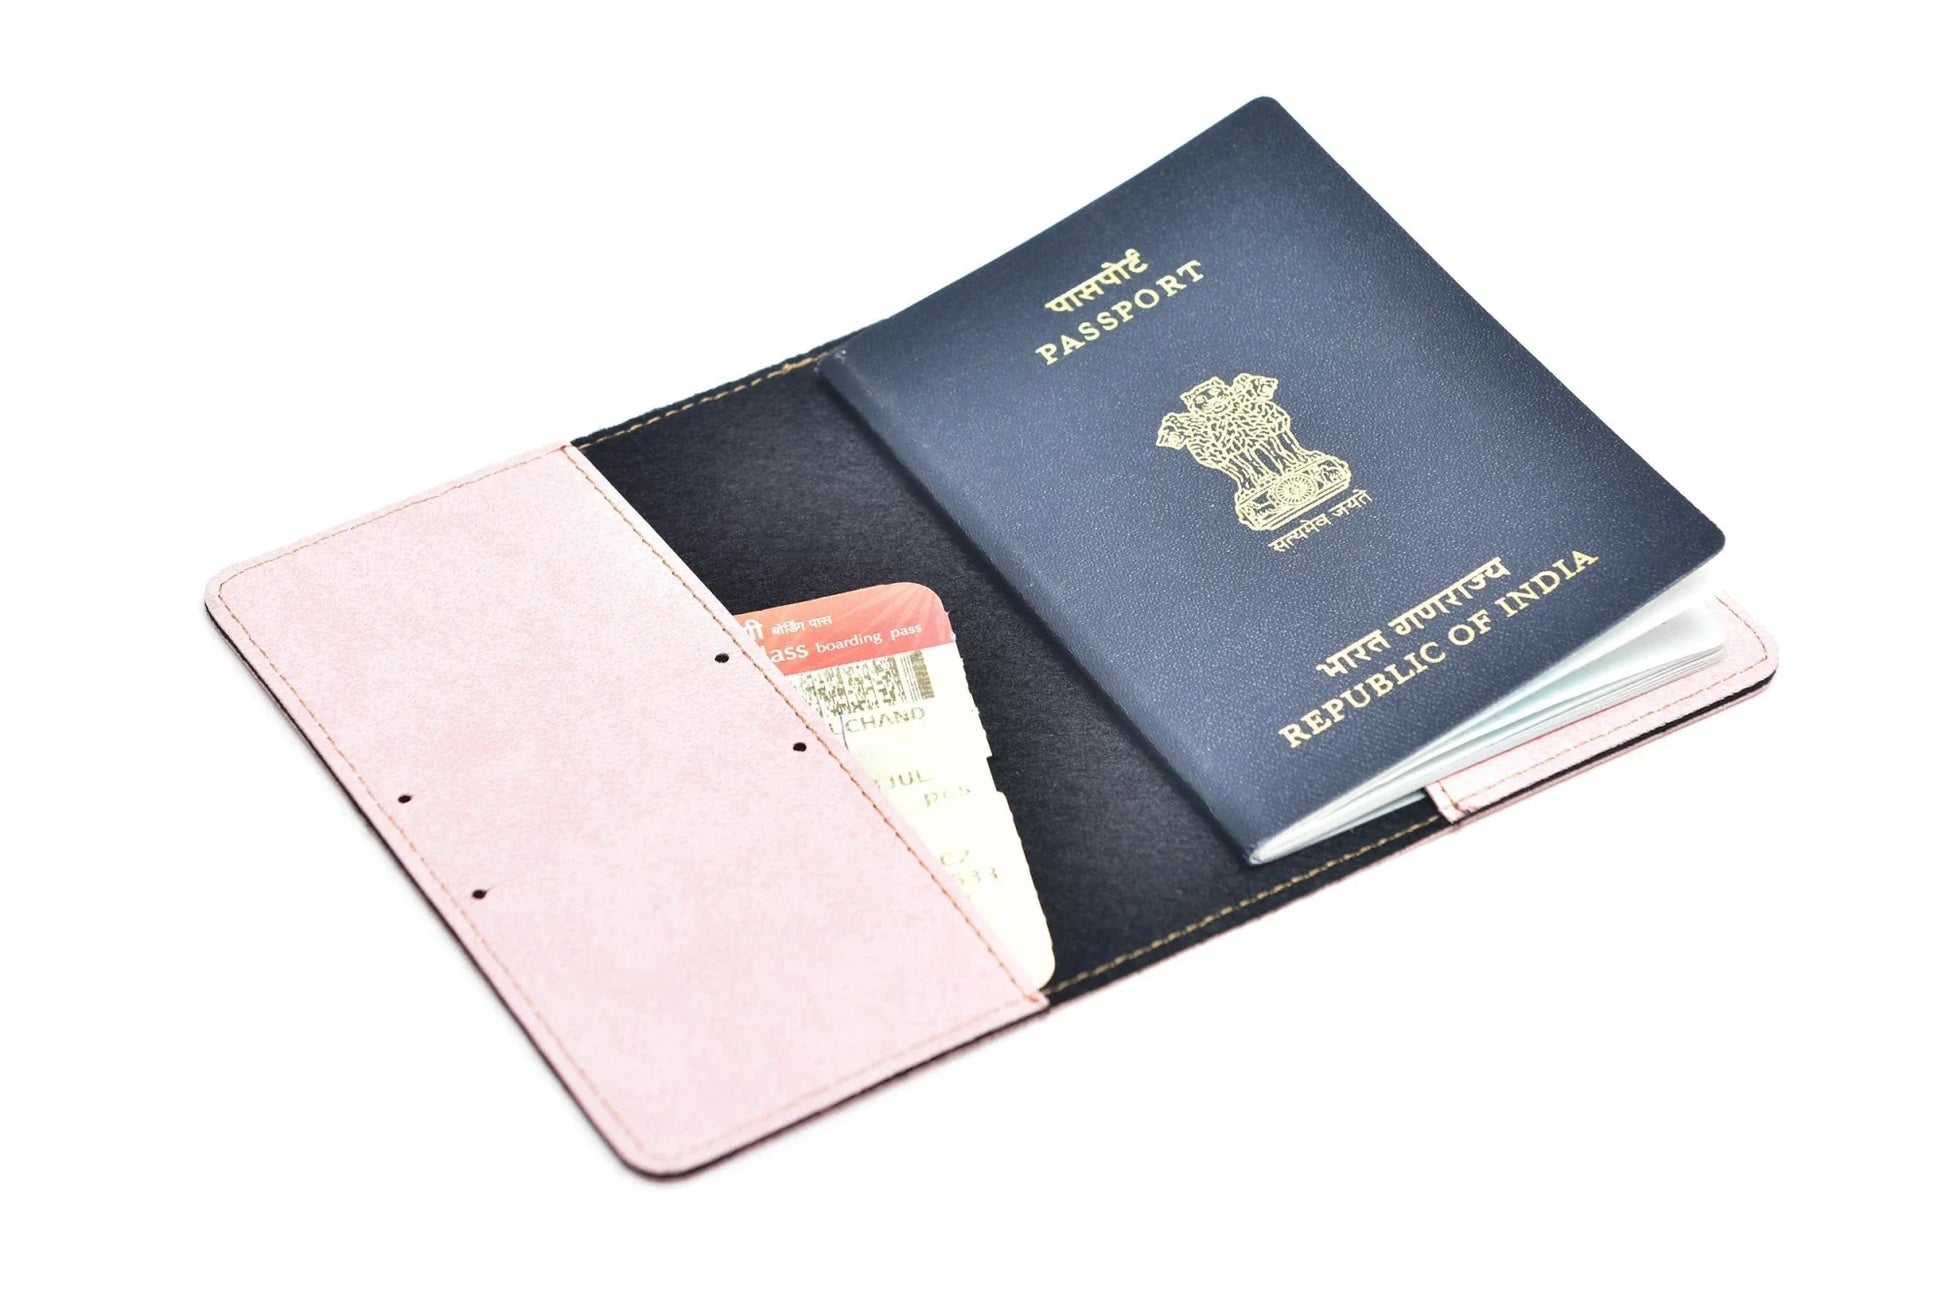 Inside or open view of pink passport case